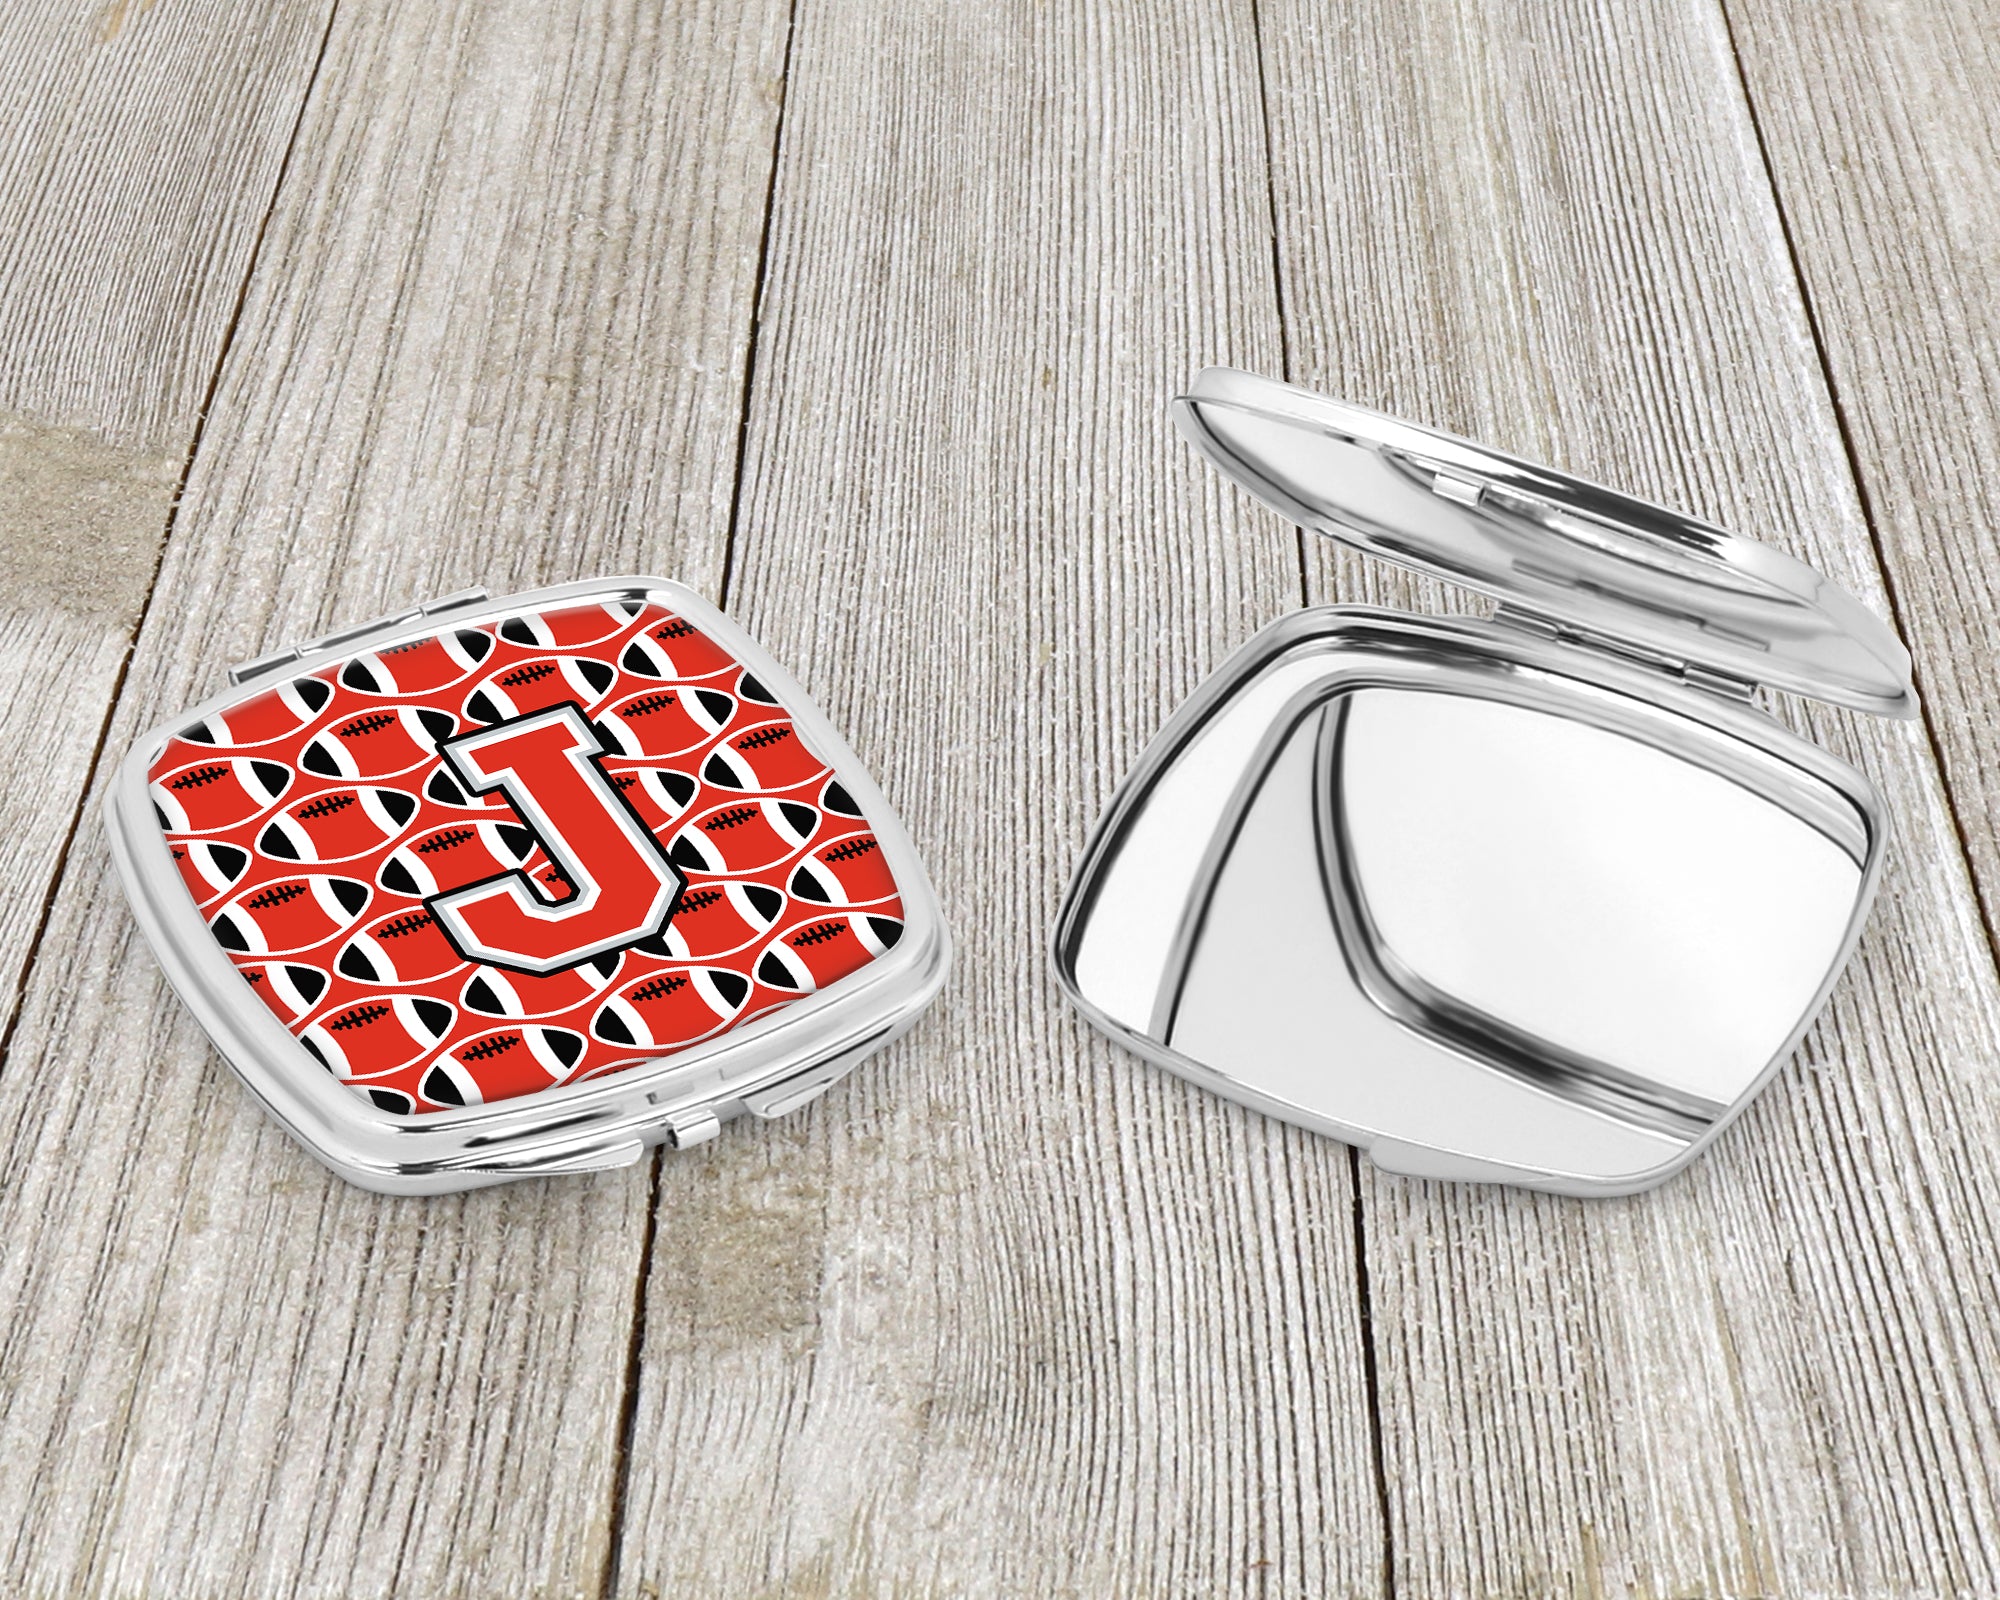 Letter J Football Scarlet and Grey Compact Mirror CJ1067-JSCM  the-store.com.